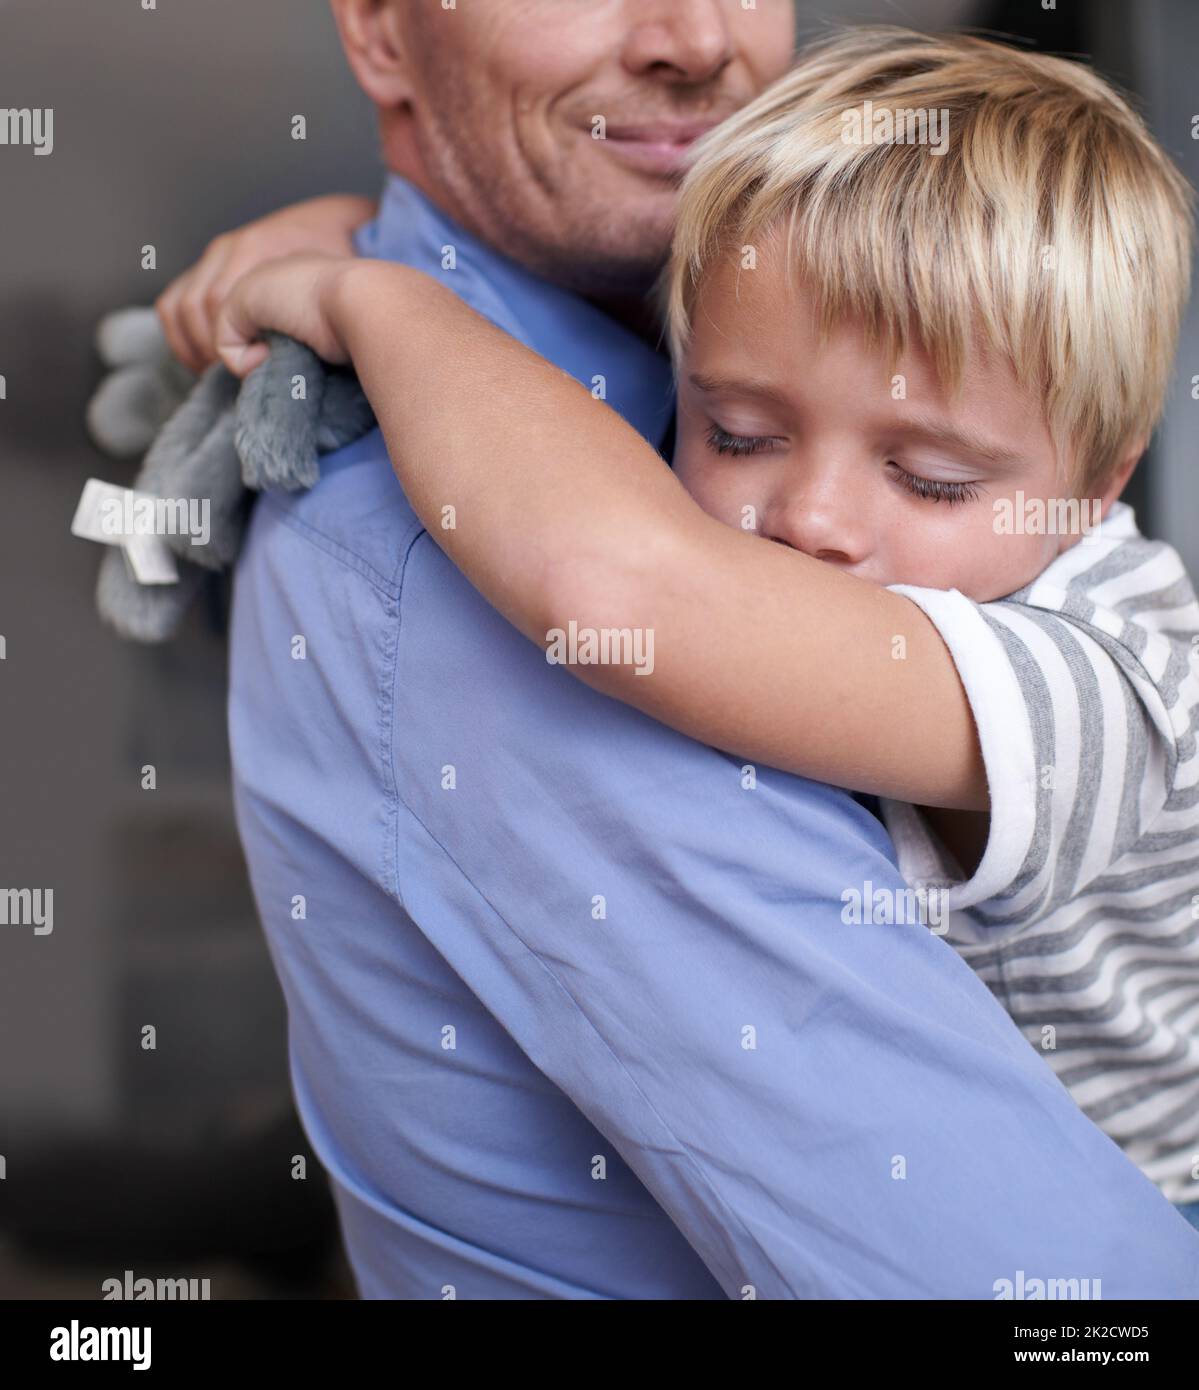 Exhausted after a fun-filled day. A mature father coming home from work and hugging his exhausted little boy. Stock Photo